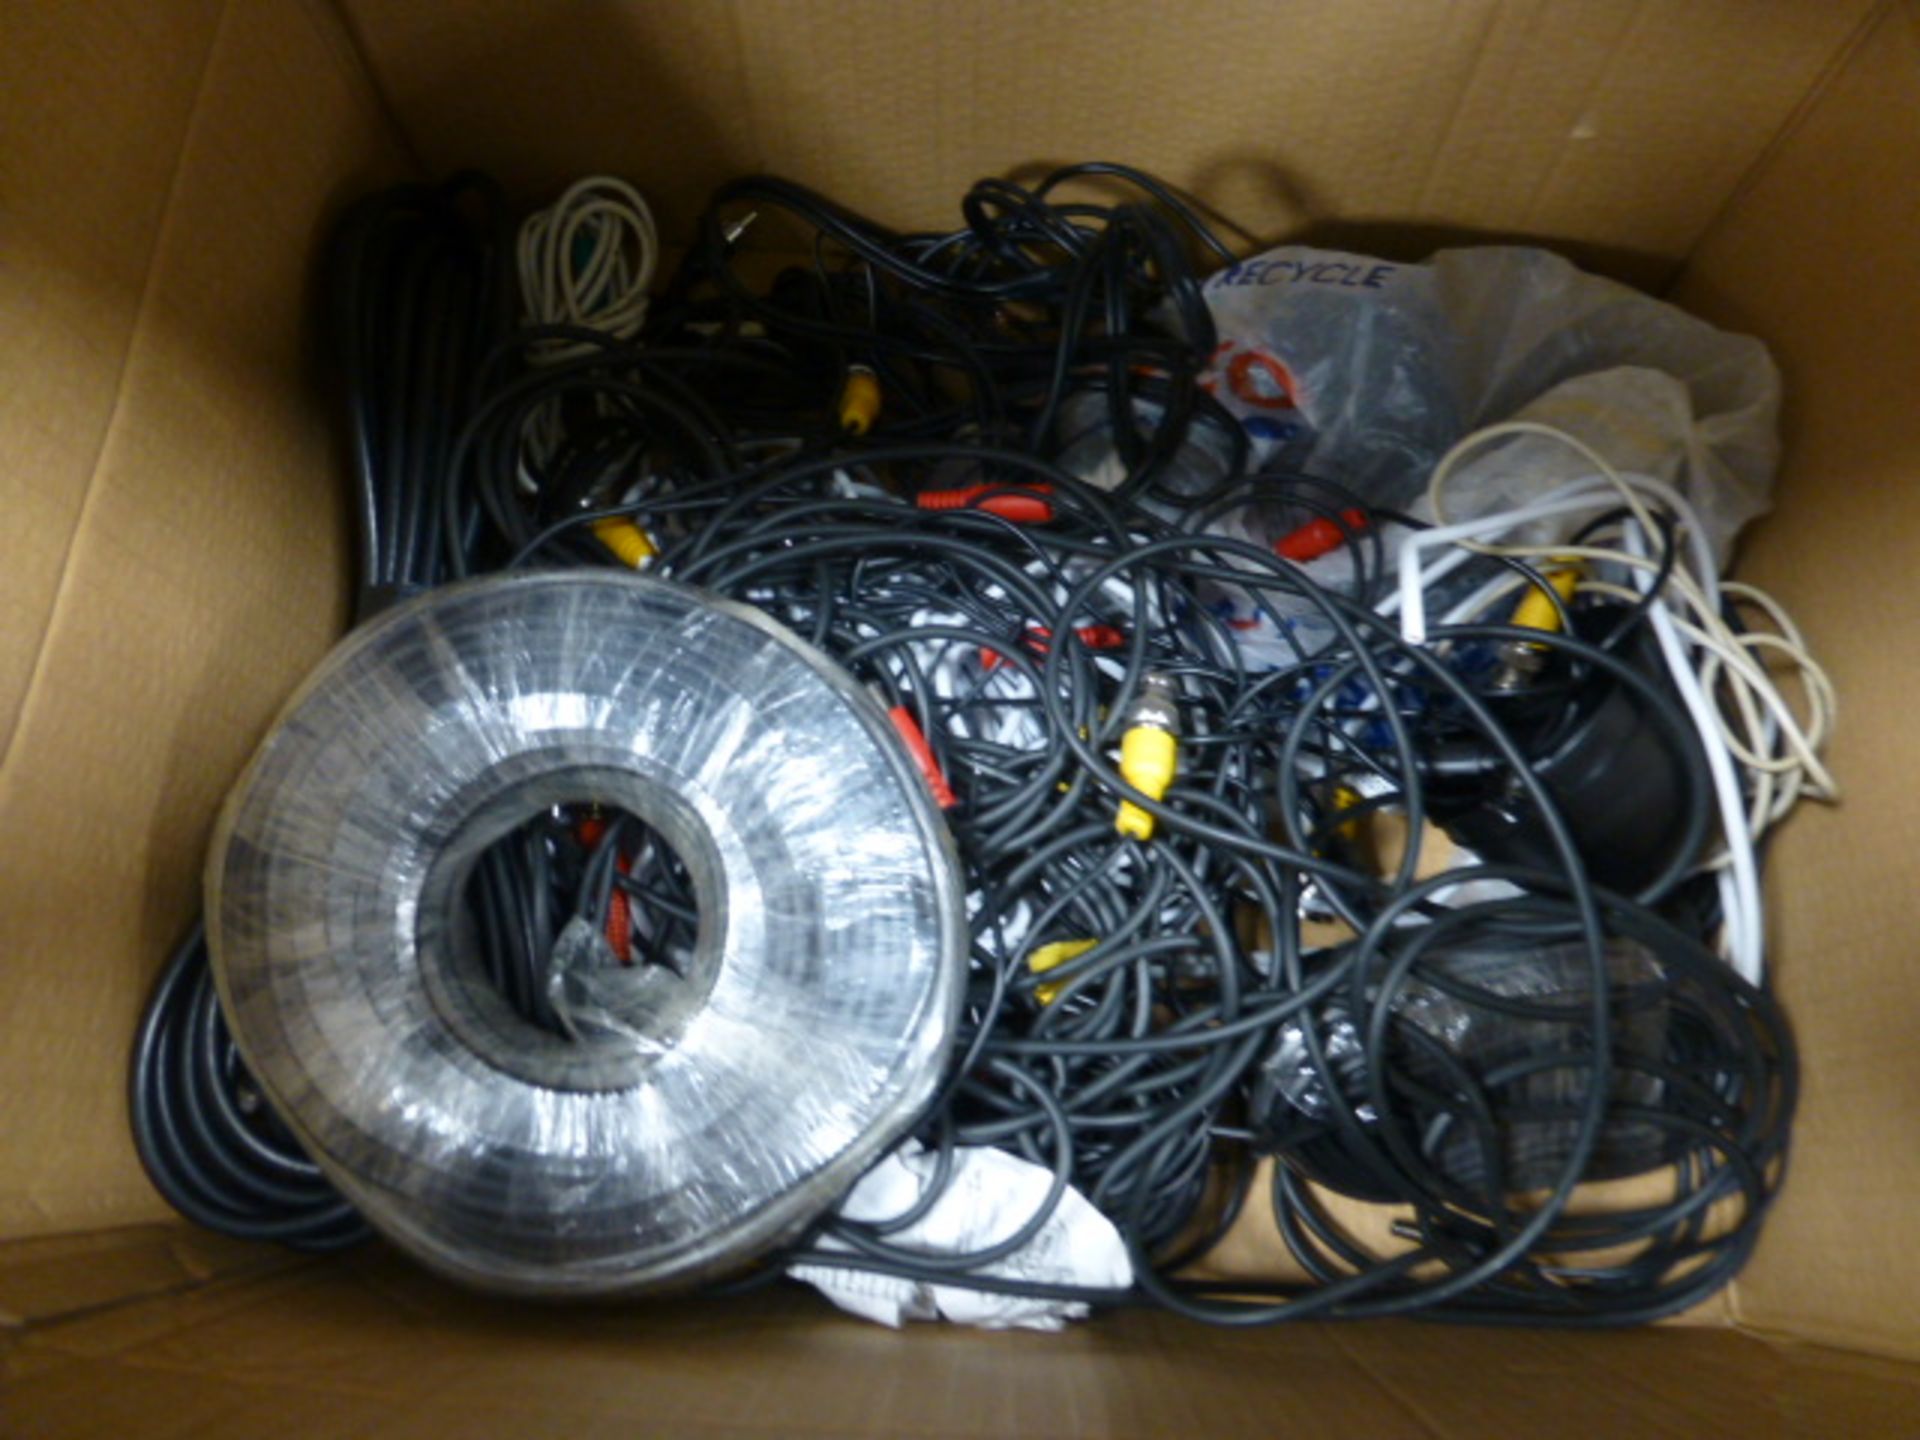 Box of approximately 14 CCTV cameras